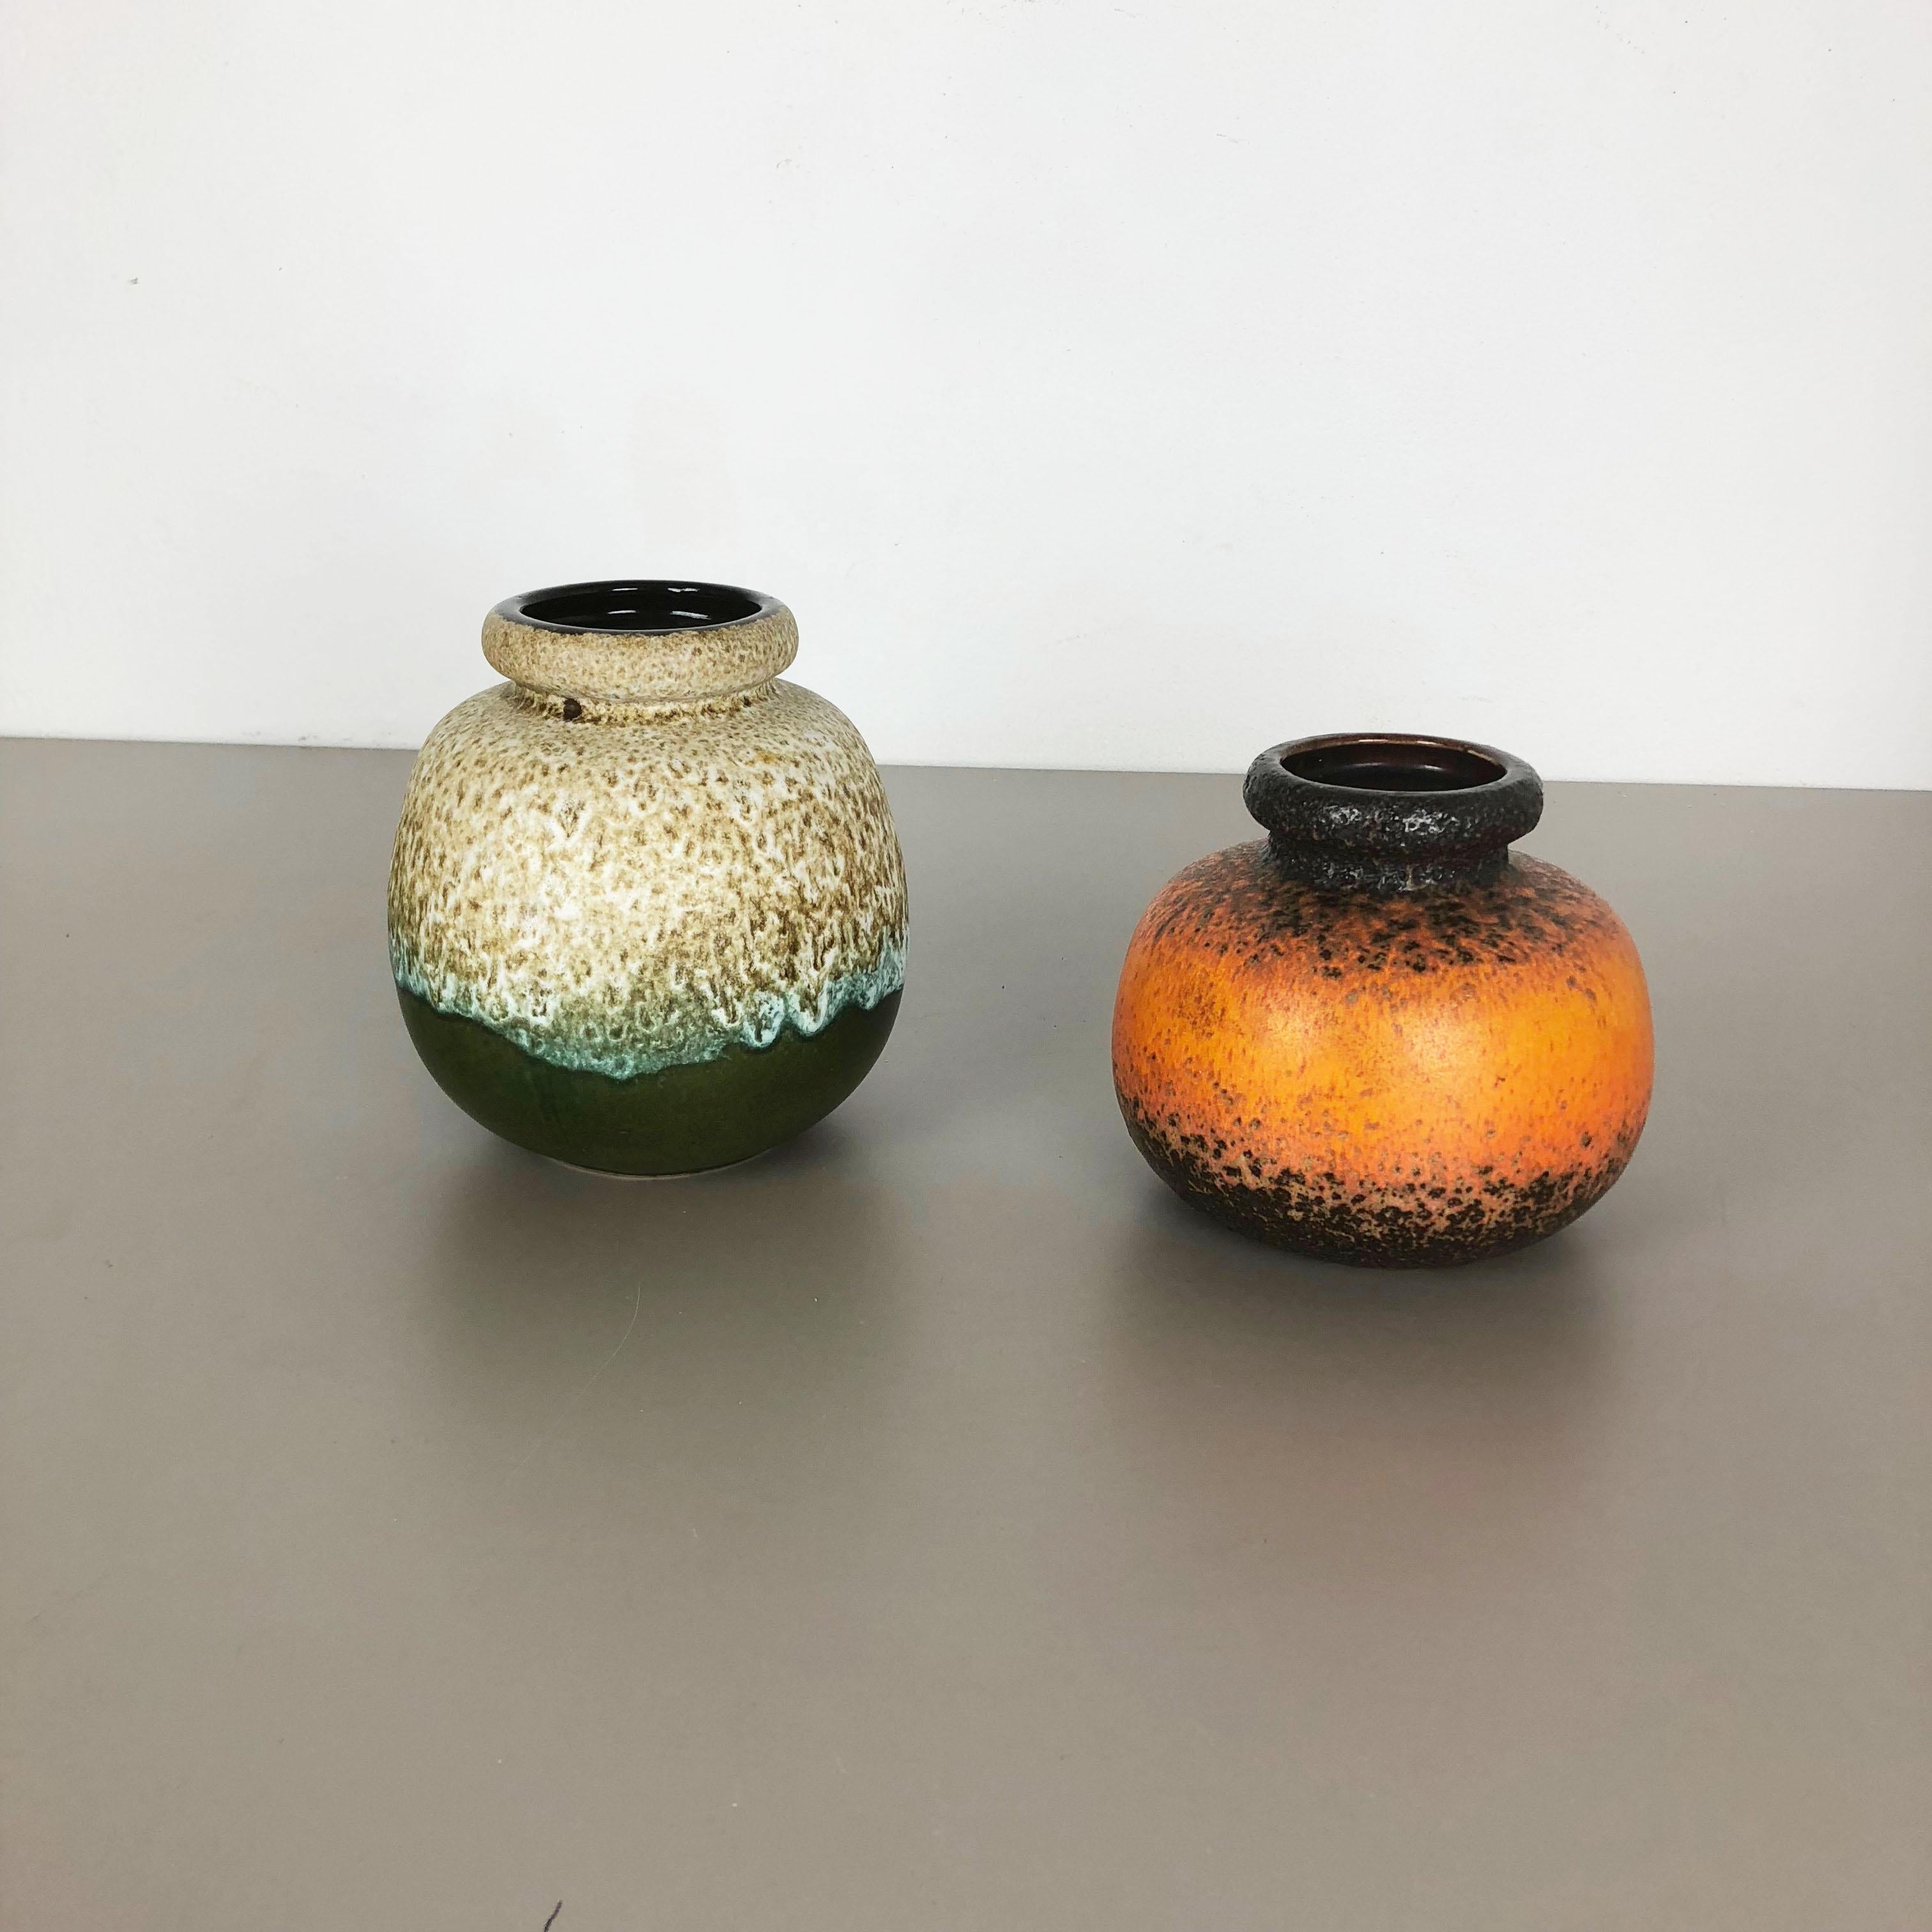 Article:

Set of two fat lava art vases

Model:
284-15
284-19



Producer:

Scheurich, Germany



Decade:

1970s




These original vintage vases was produced in the 1970s in Germany. It is made of ceramic pottery in fat lava